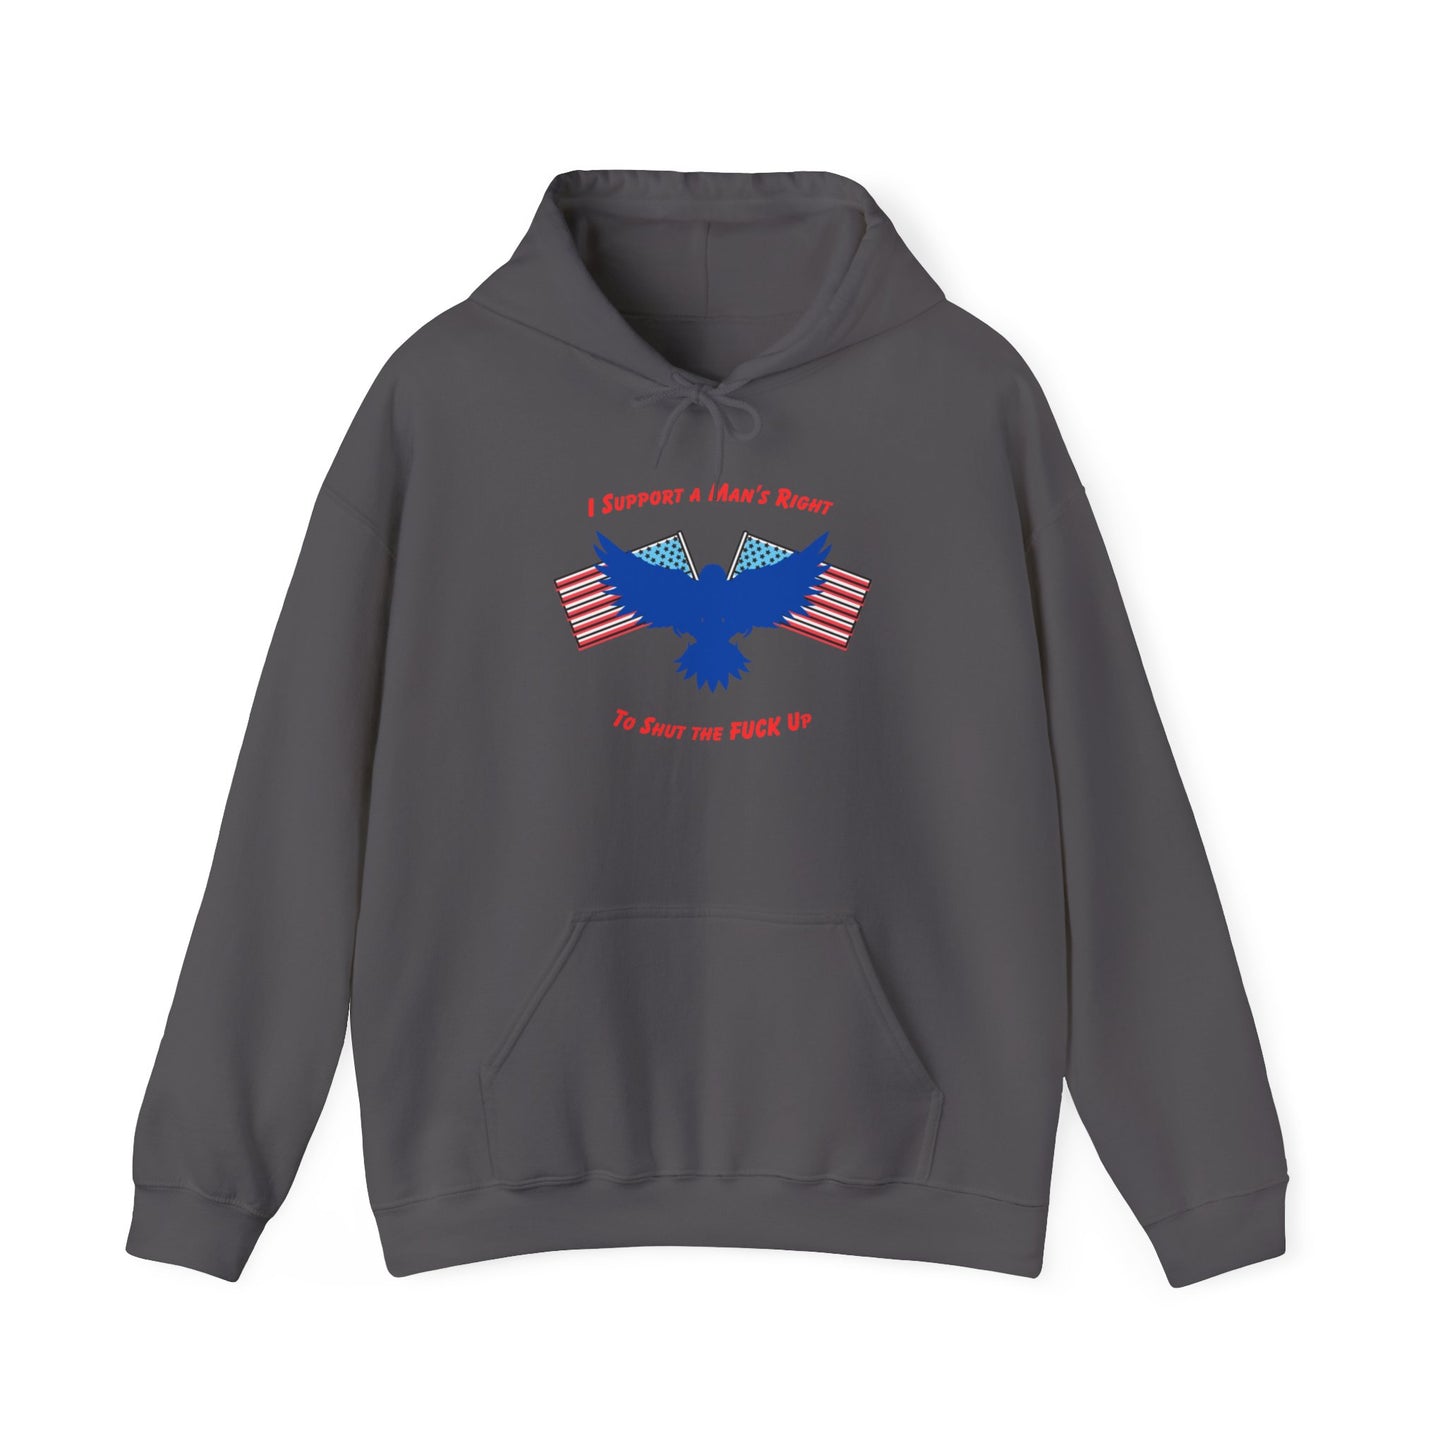 I support a mans right to shut the fuck up hoodie